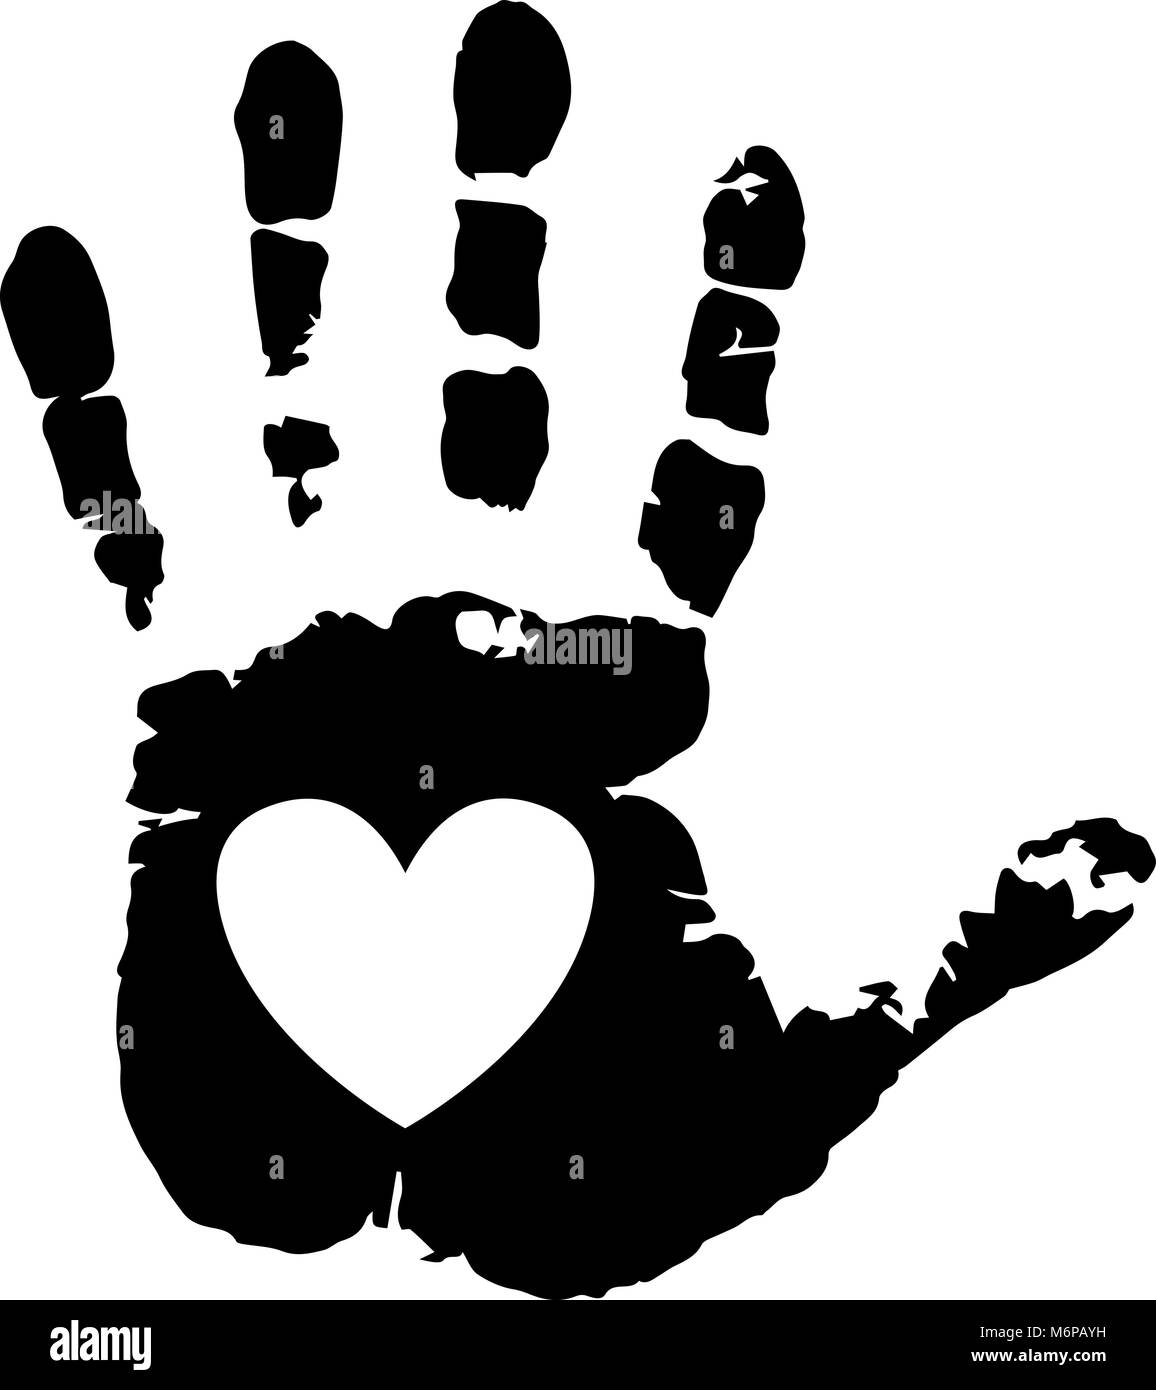 Download Hand Silhouette Black And White - Black heart rate ...